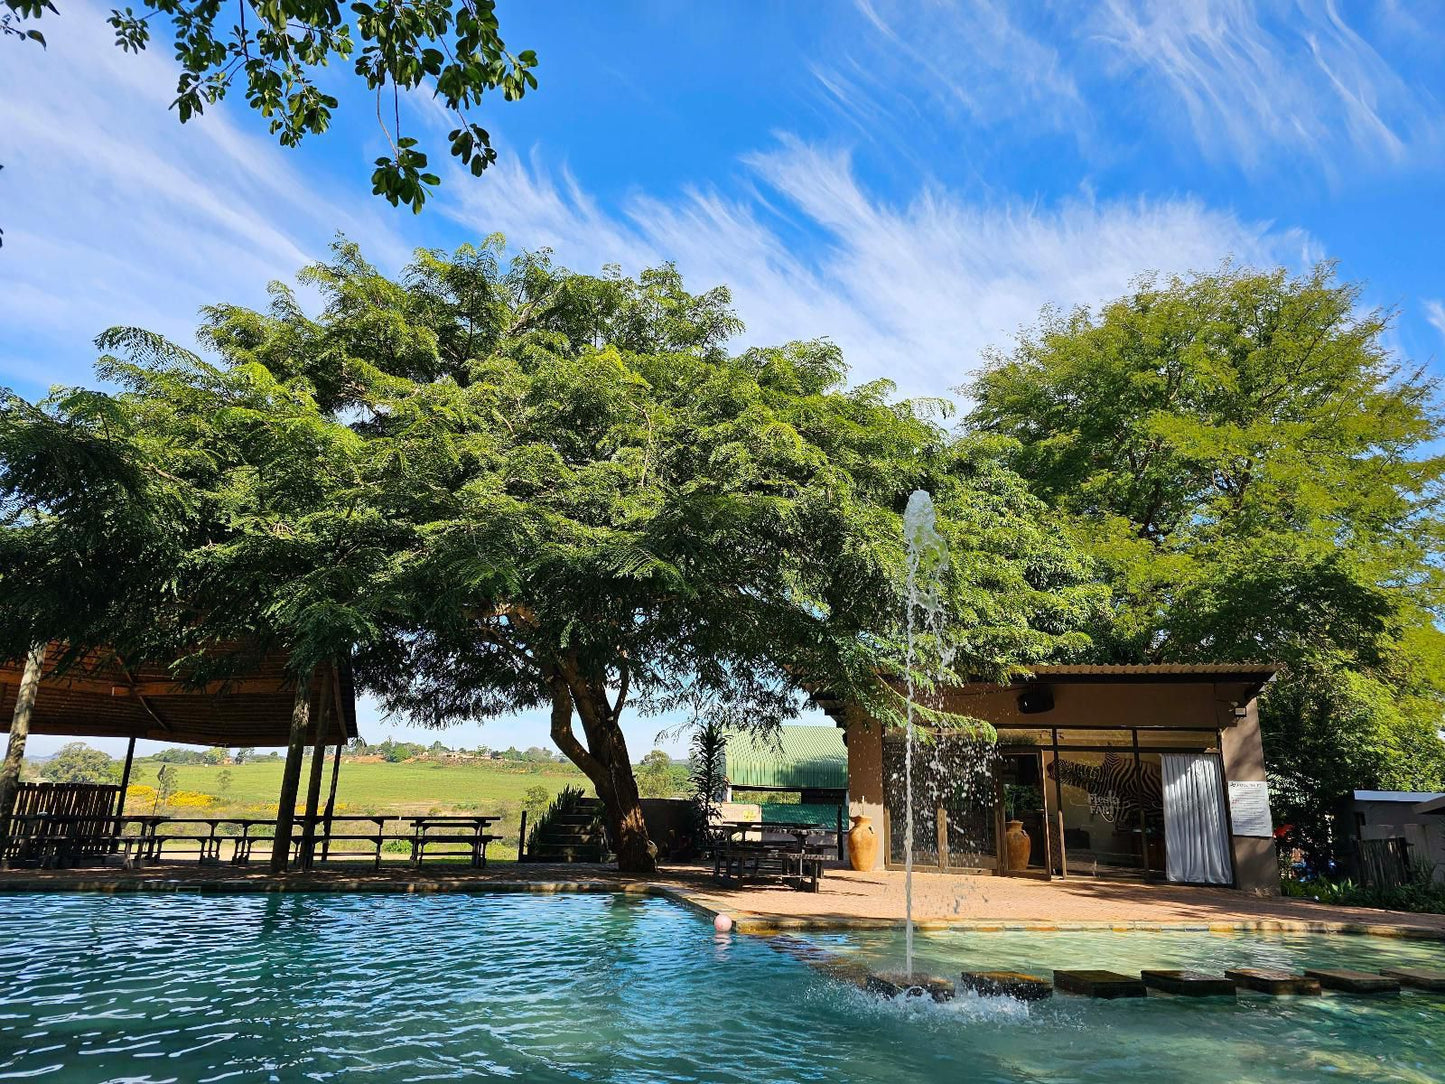 El Roi Guest Lodge White River Mpumalanga South Africa Complementary Colors, Swimming Pool